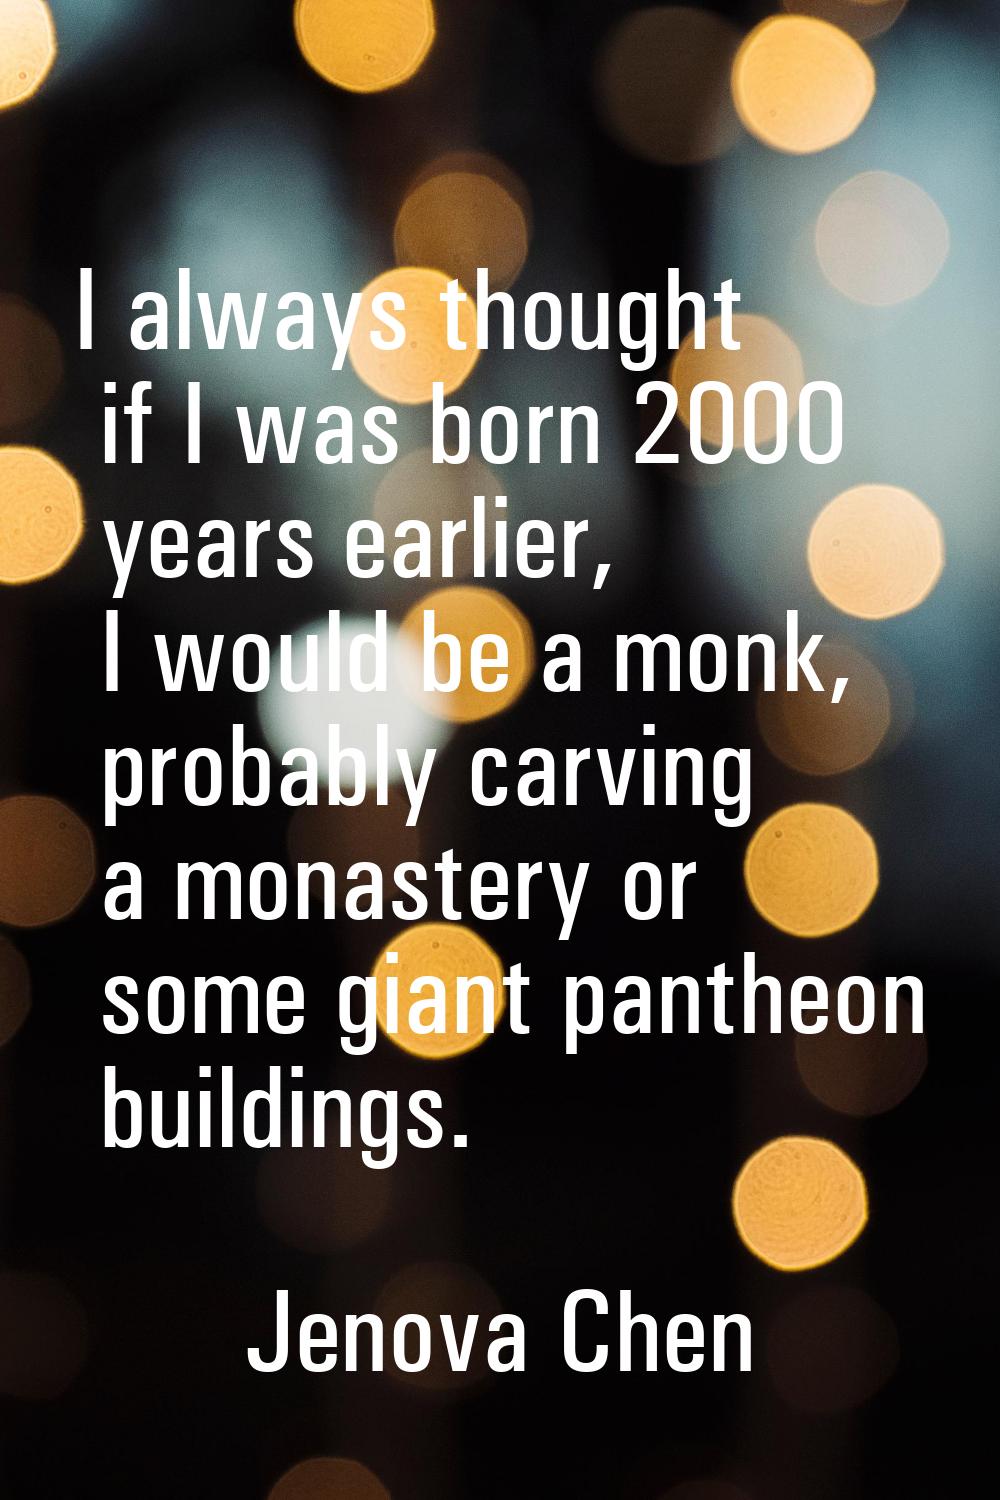 I always thought if I was born 2000 years earlier, I would be a monk, probably carving a monastery 